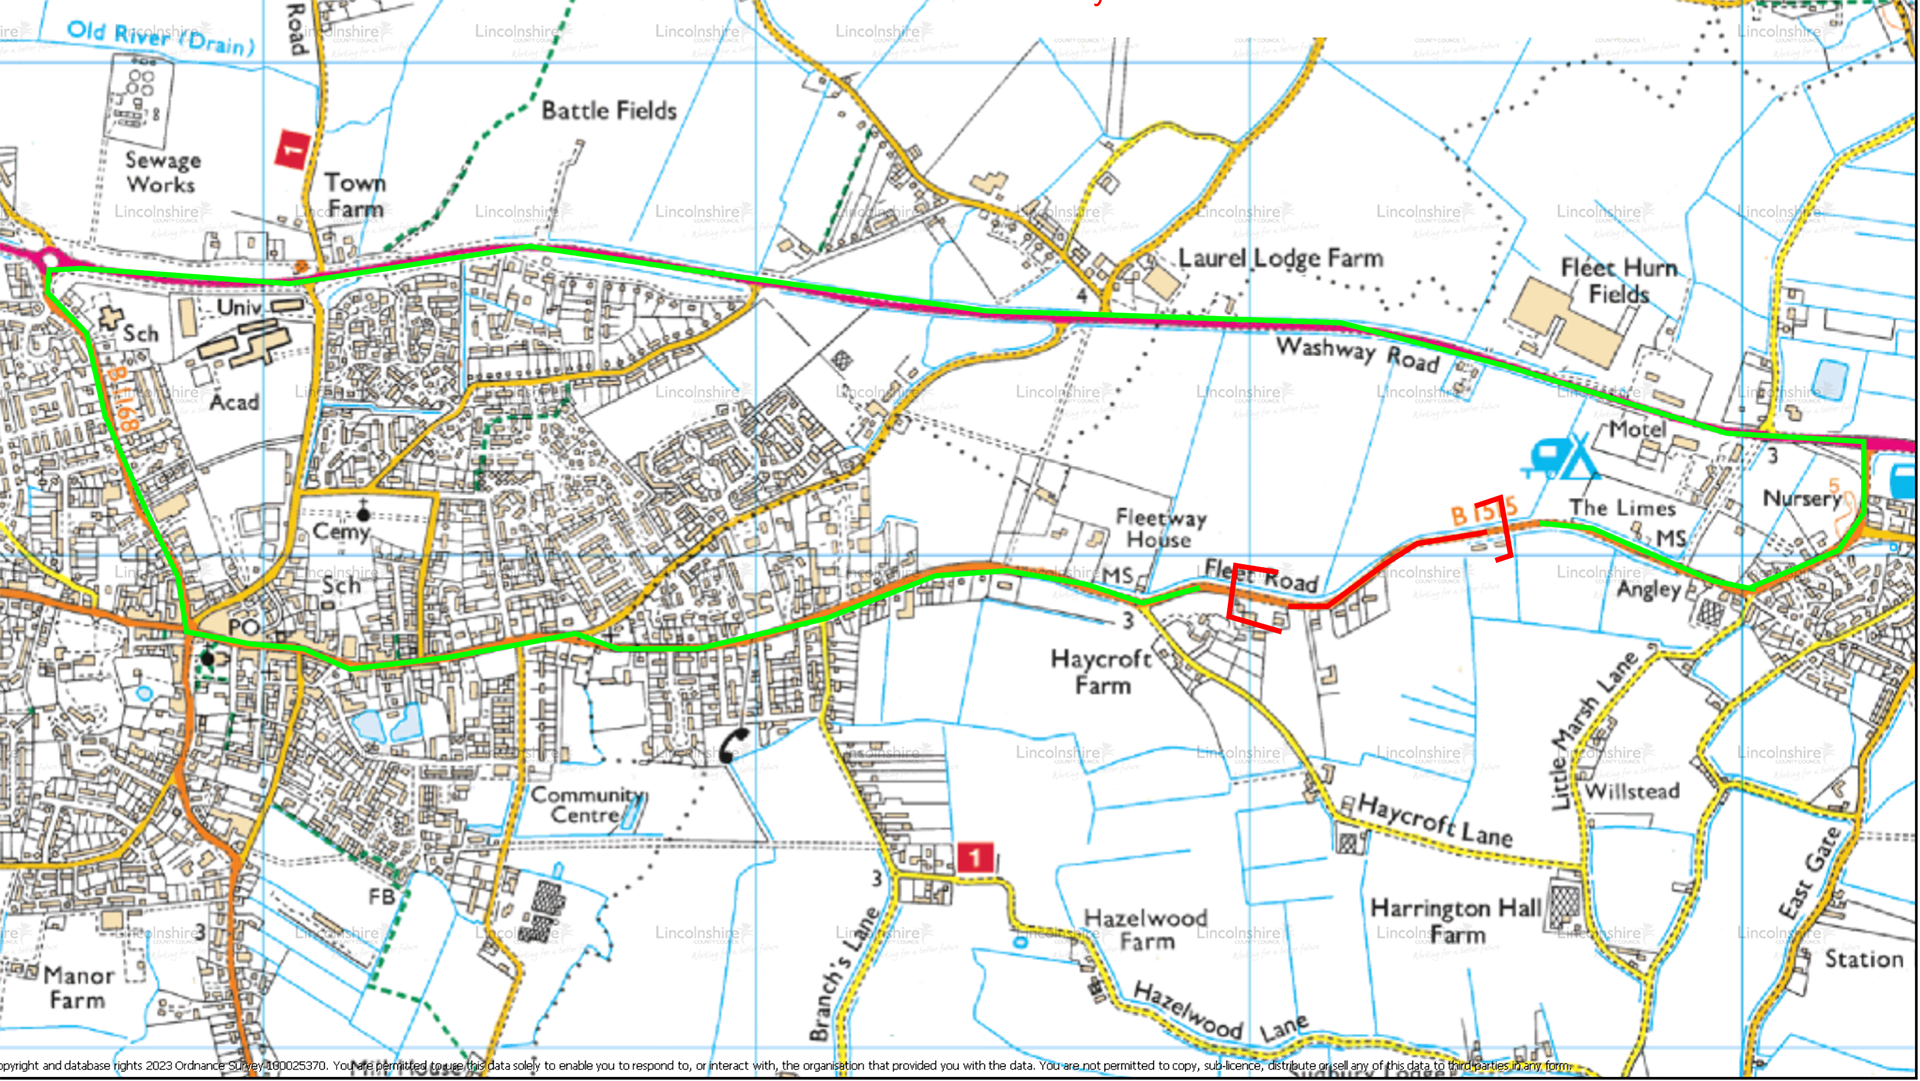 The diversion route for the B1515